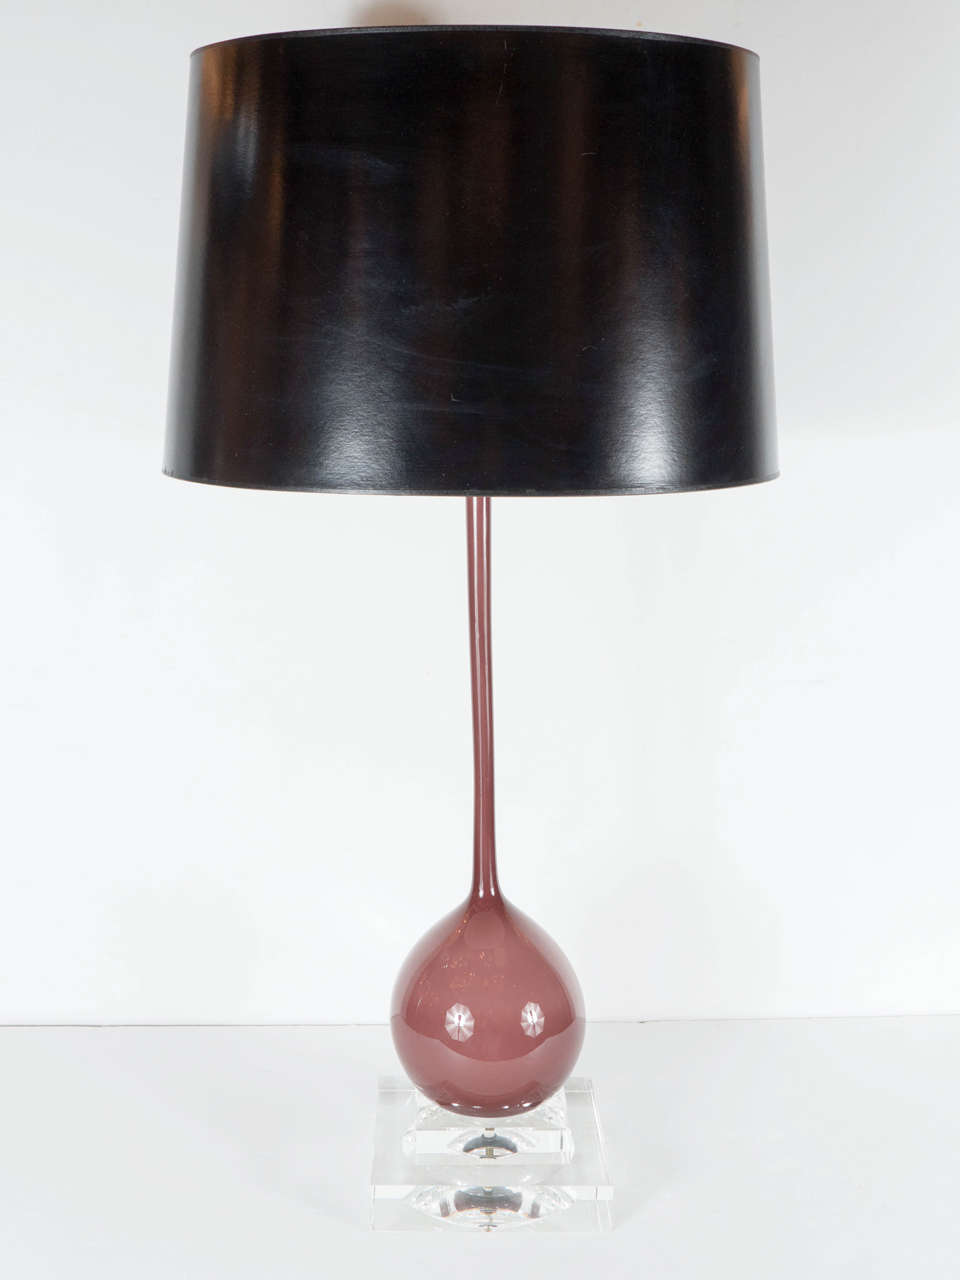 This exquisite Mid-Century Modernist table lamp features a tear drop body in handblown murano glass in a sophisticated mauve hue resting on stepped glass base. This lamp is in excellent condition and has been newly rewired and is fitted with a